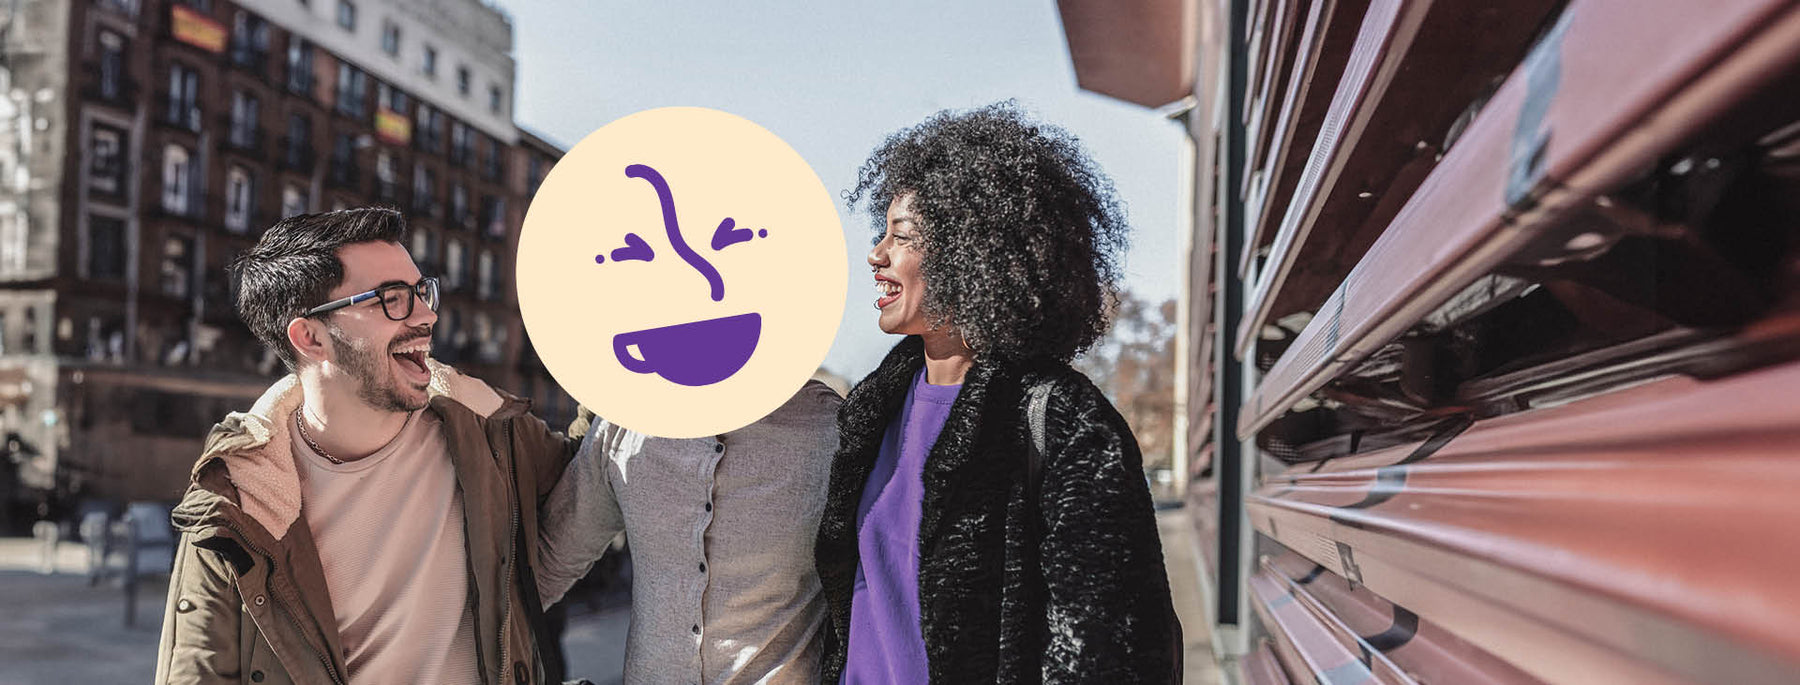 Rebrand New Face-Same Taste -- People on the street with Coffee Bean Direct rebrand face logo